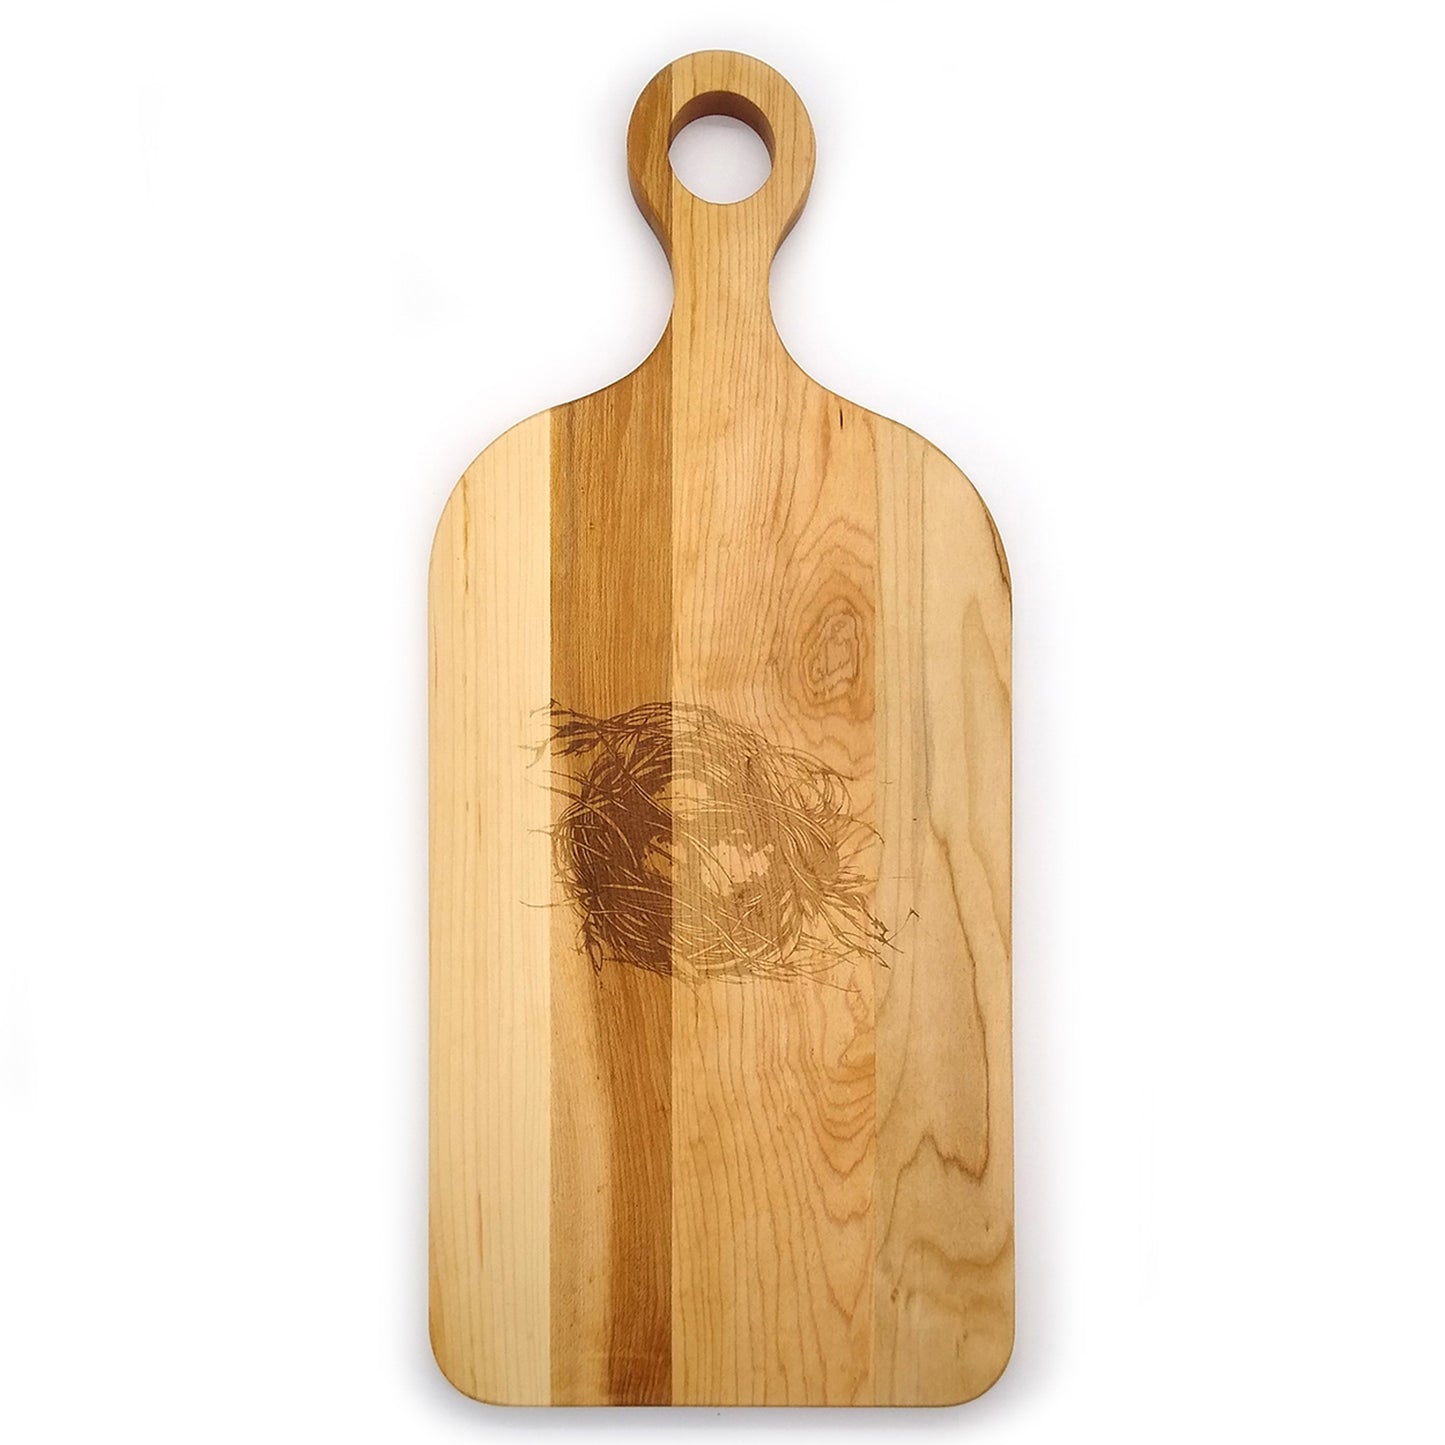 Laura Zindel Large Maple Paddle Serving Board - More designs available